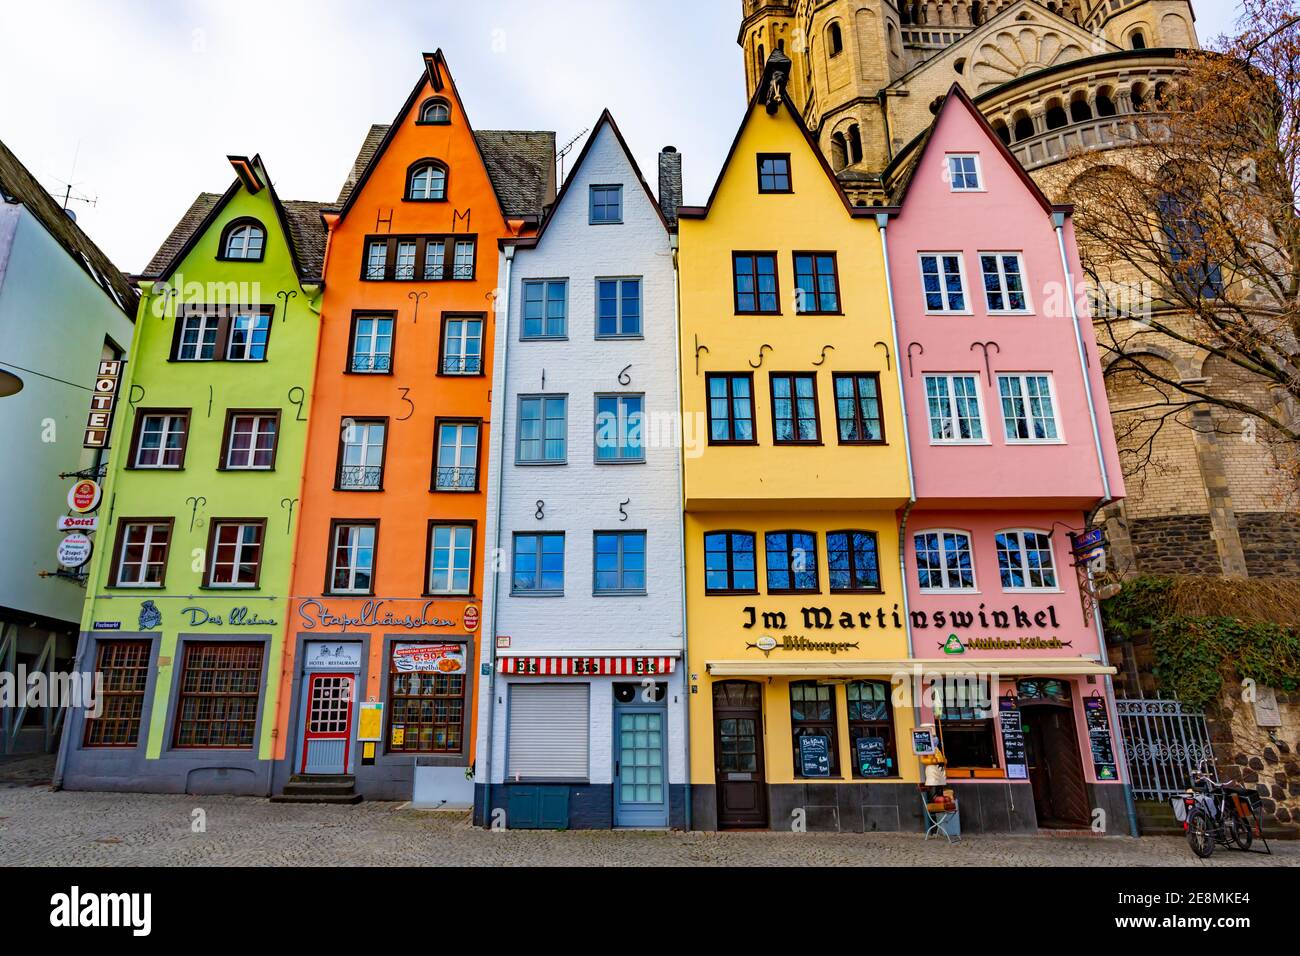 cologne, NRW, Germany, 01 31 2021, four facades of famous colored houses in cologne old town, stapelhaeuschen Stock Photo